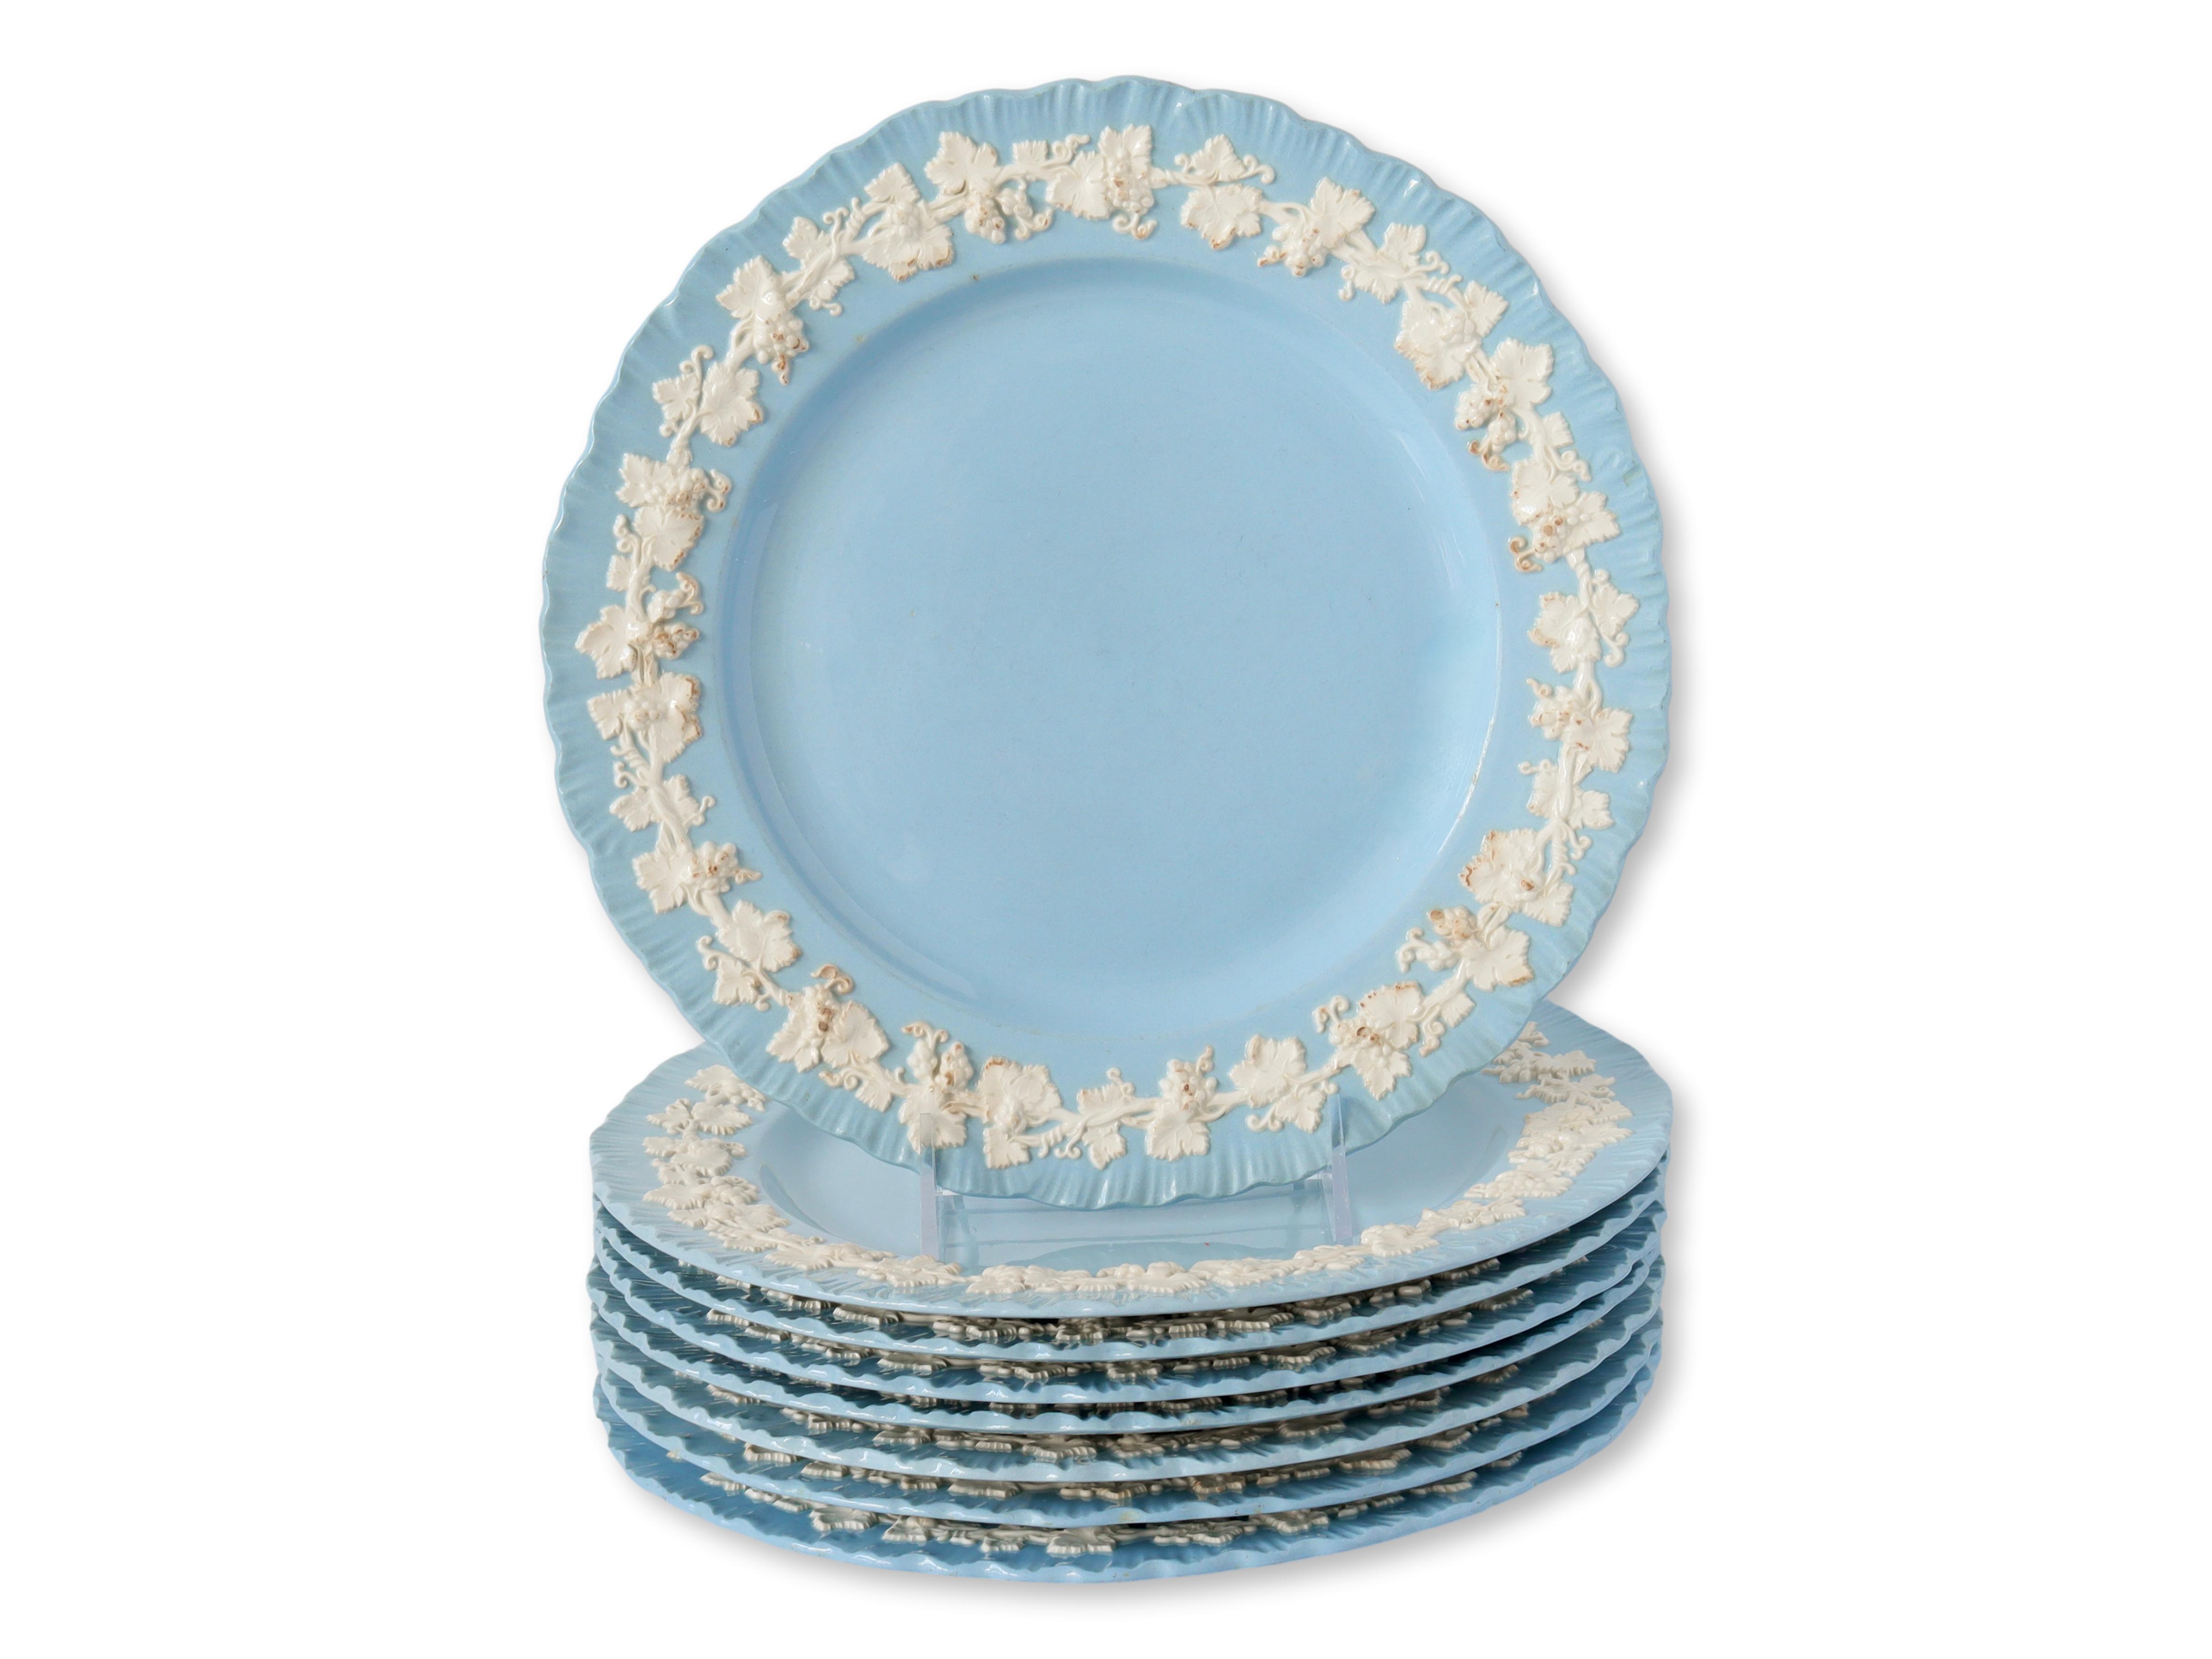 Wedgwood Queens Ware Dinner Plates, S/8